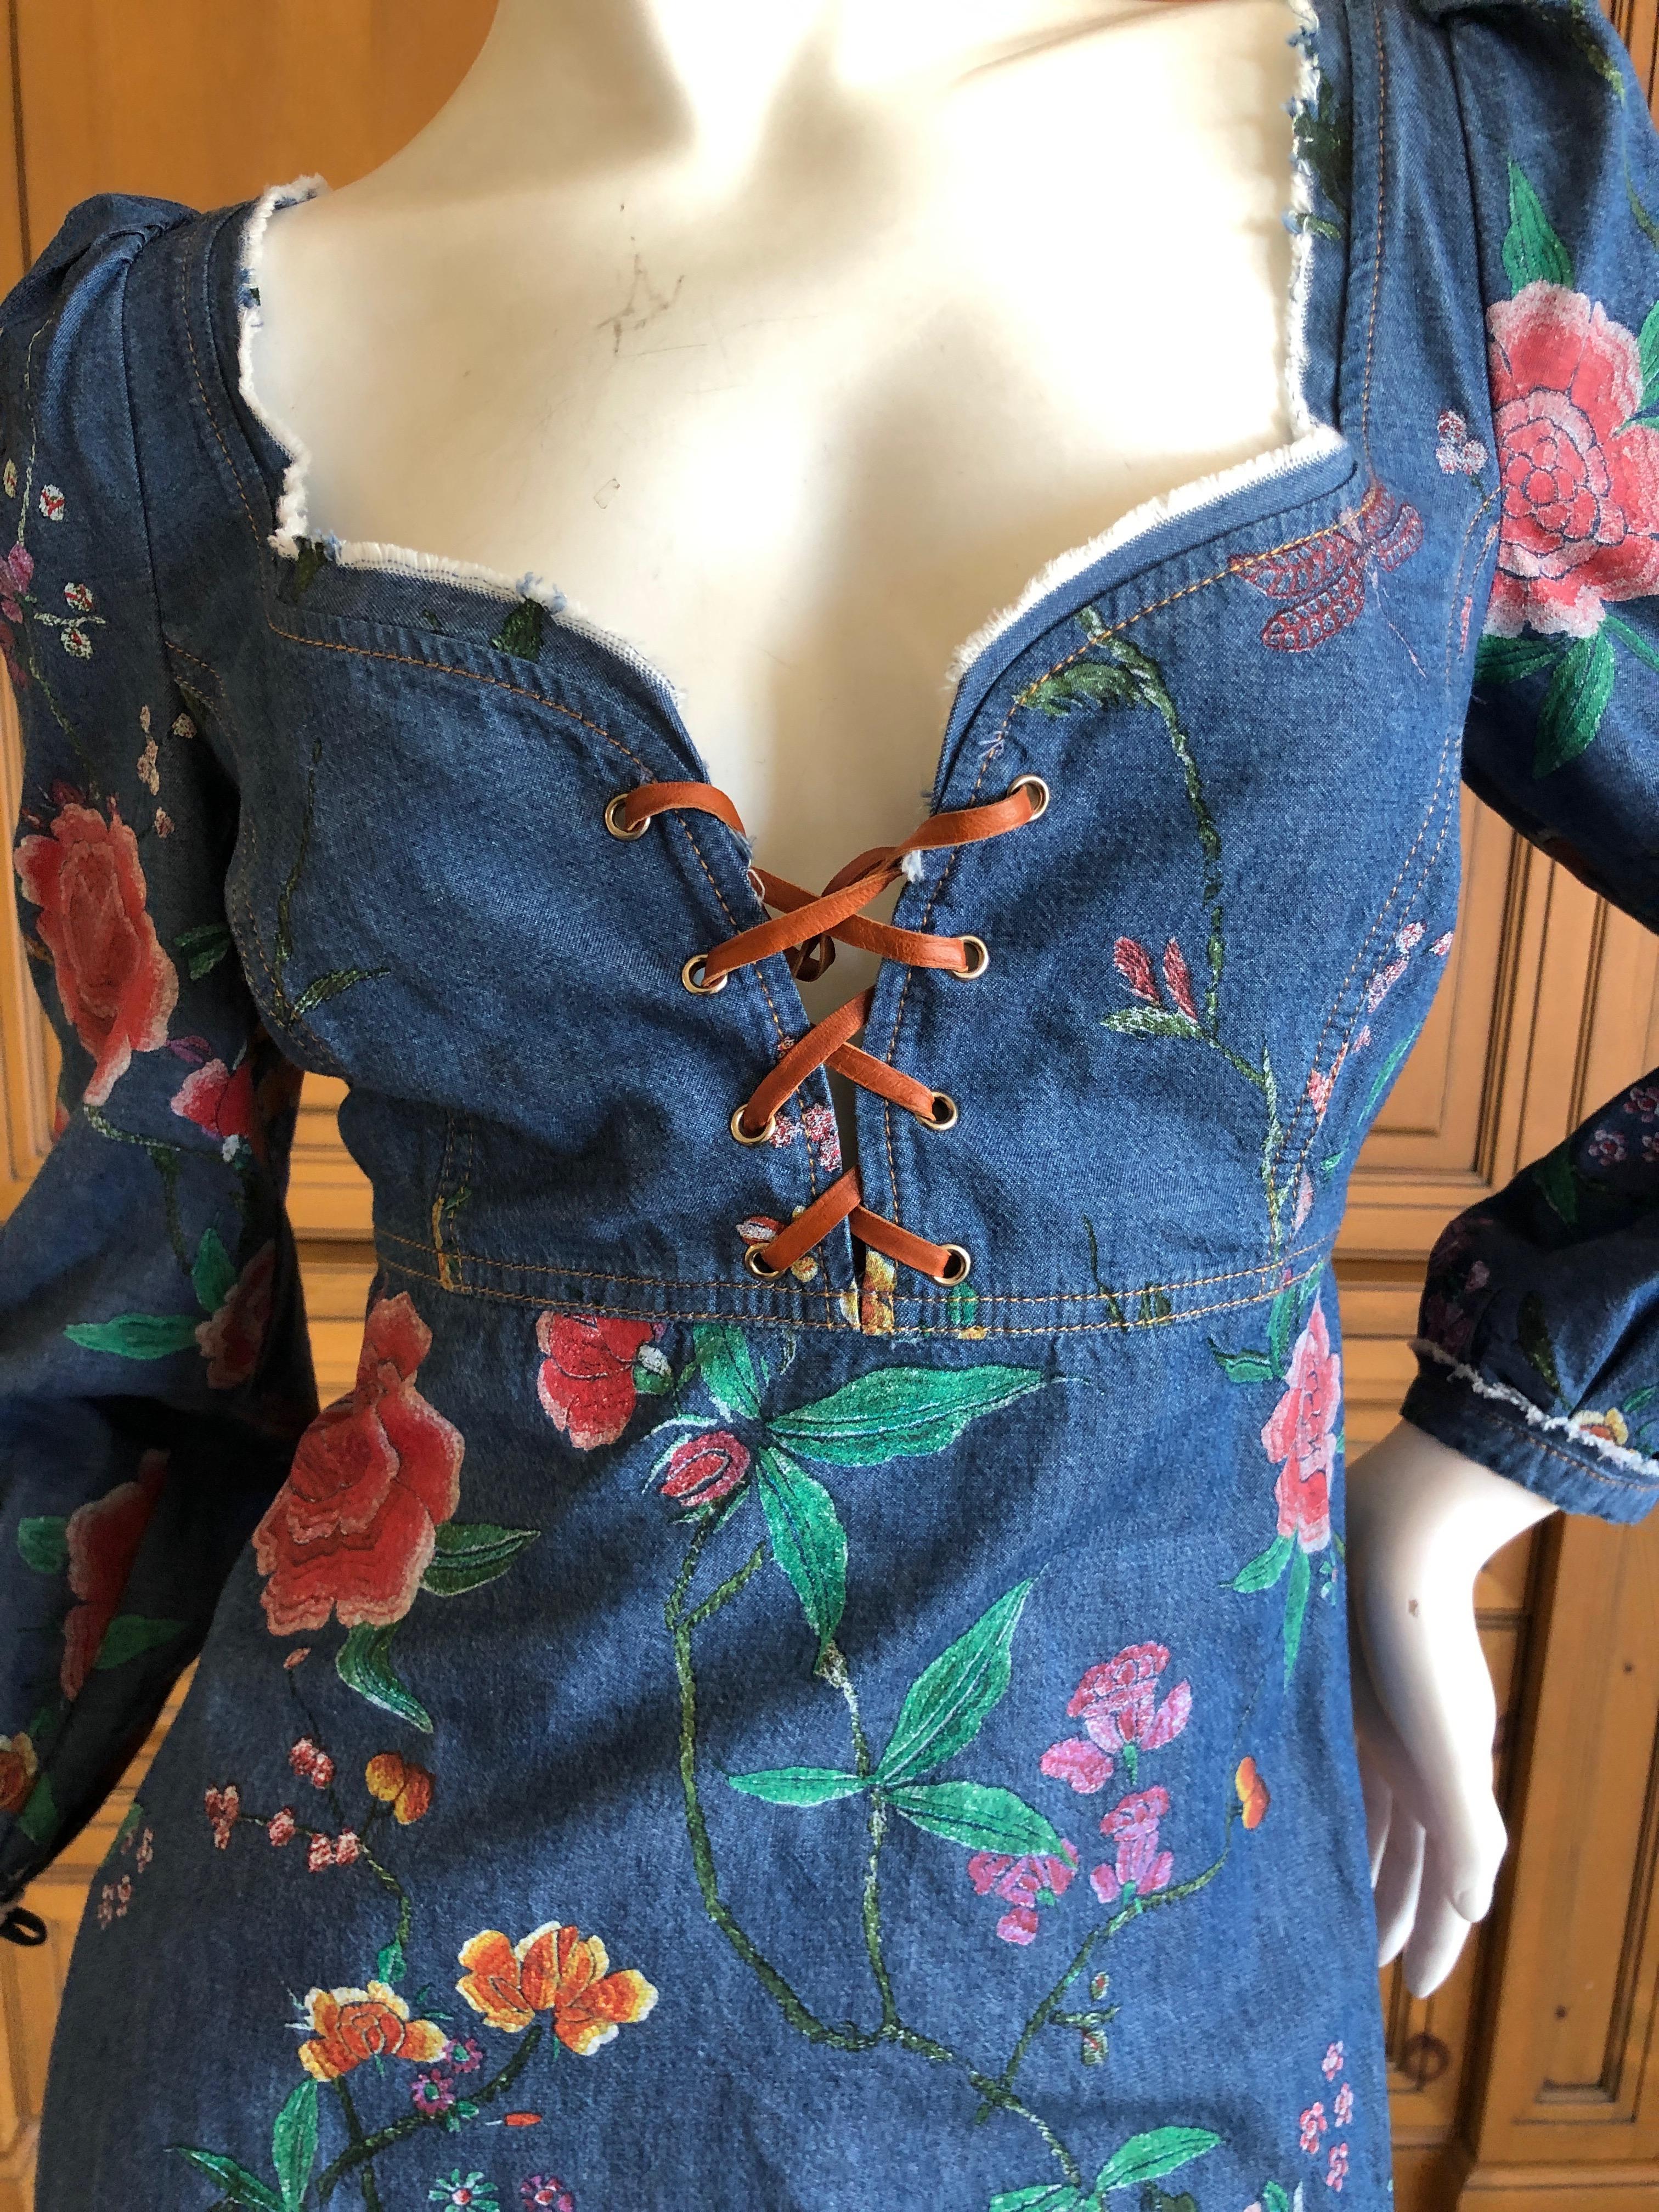 Roberto Cavalli Folkloric Rose Print Denim Cocktail Dress with Lace Up Details
So sweet and sexy.
Size 40
 Bust 34